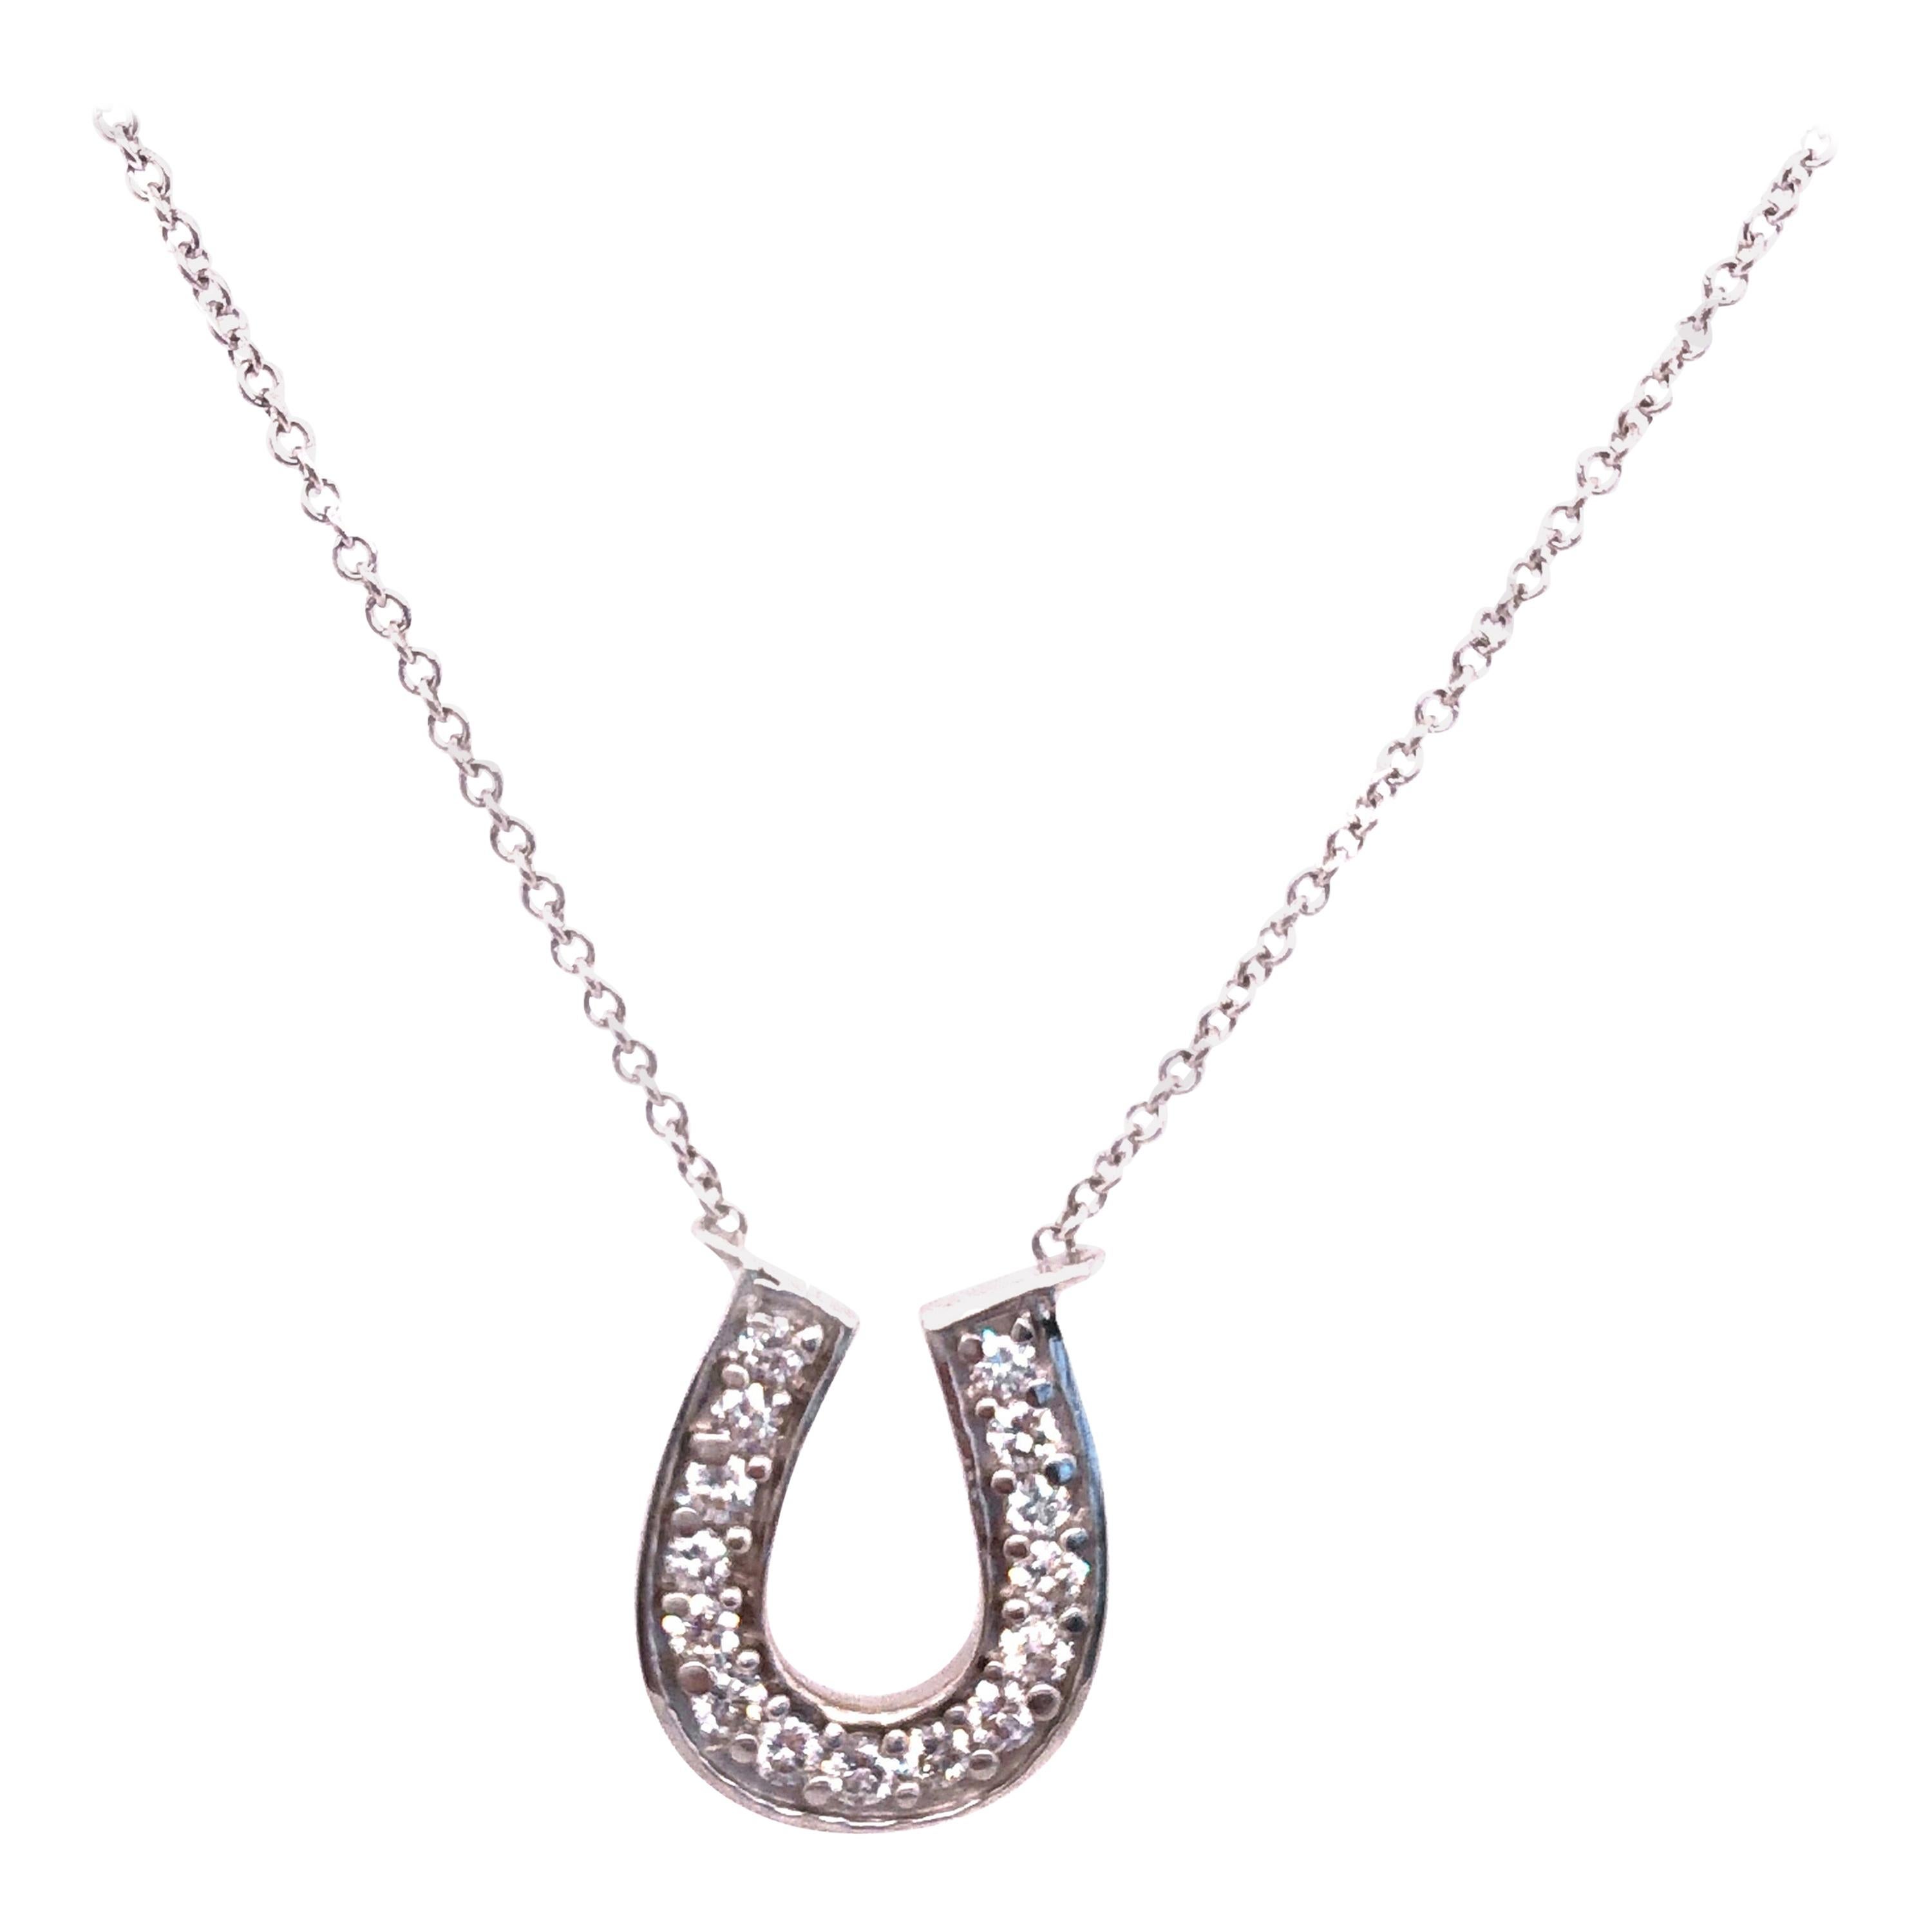 18 Karat White Gold Cable Link Necklace with Horse Shoe Pendant 0.50 TDW